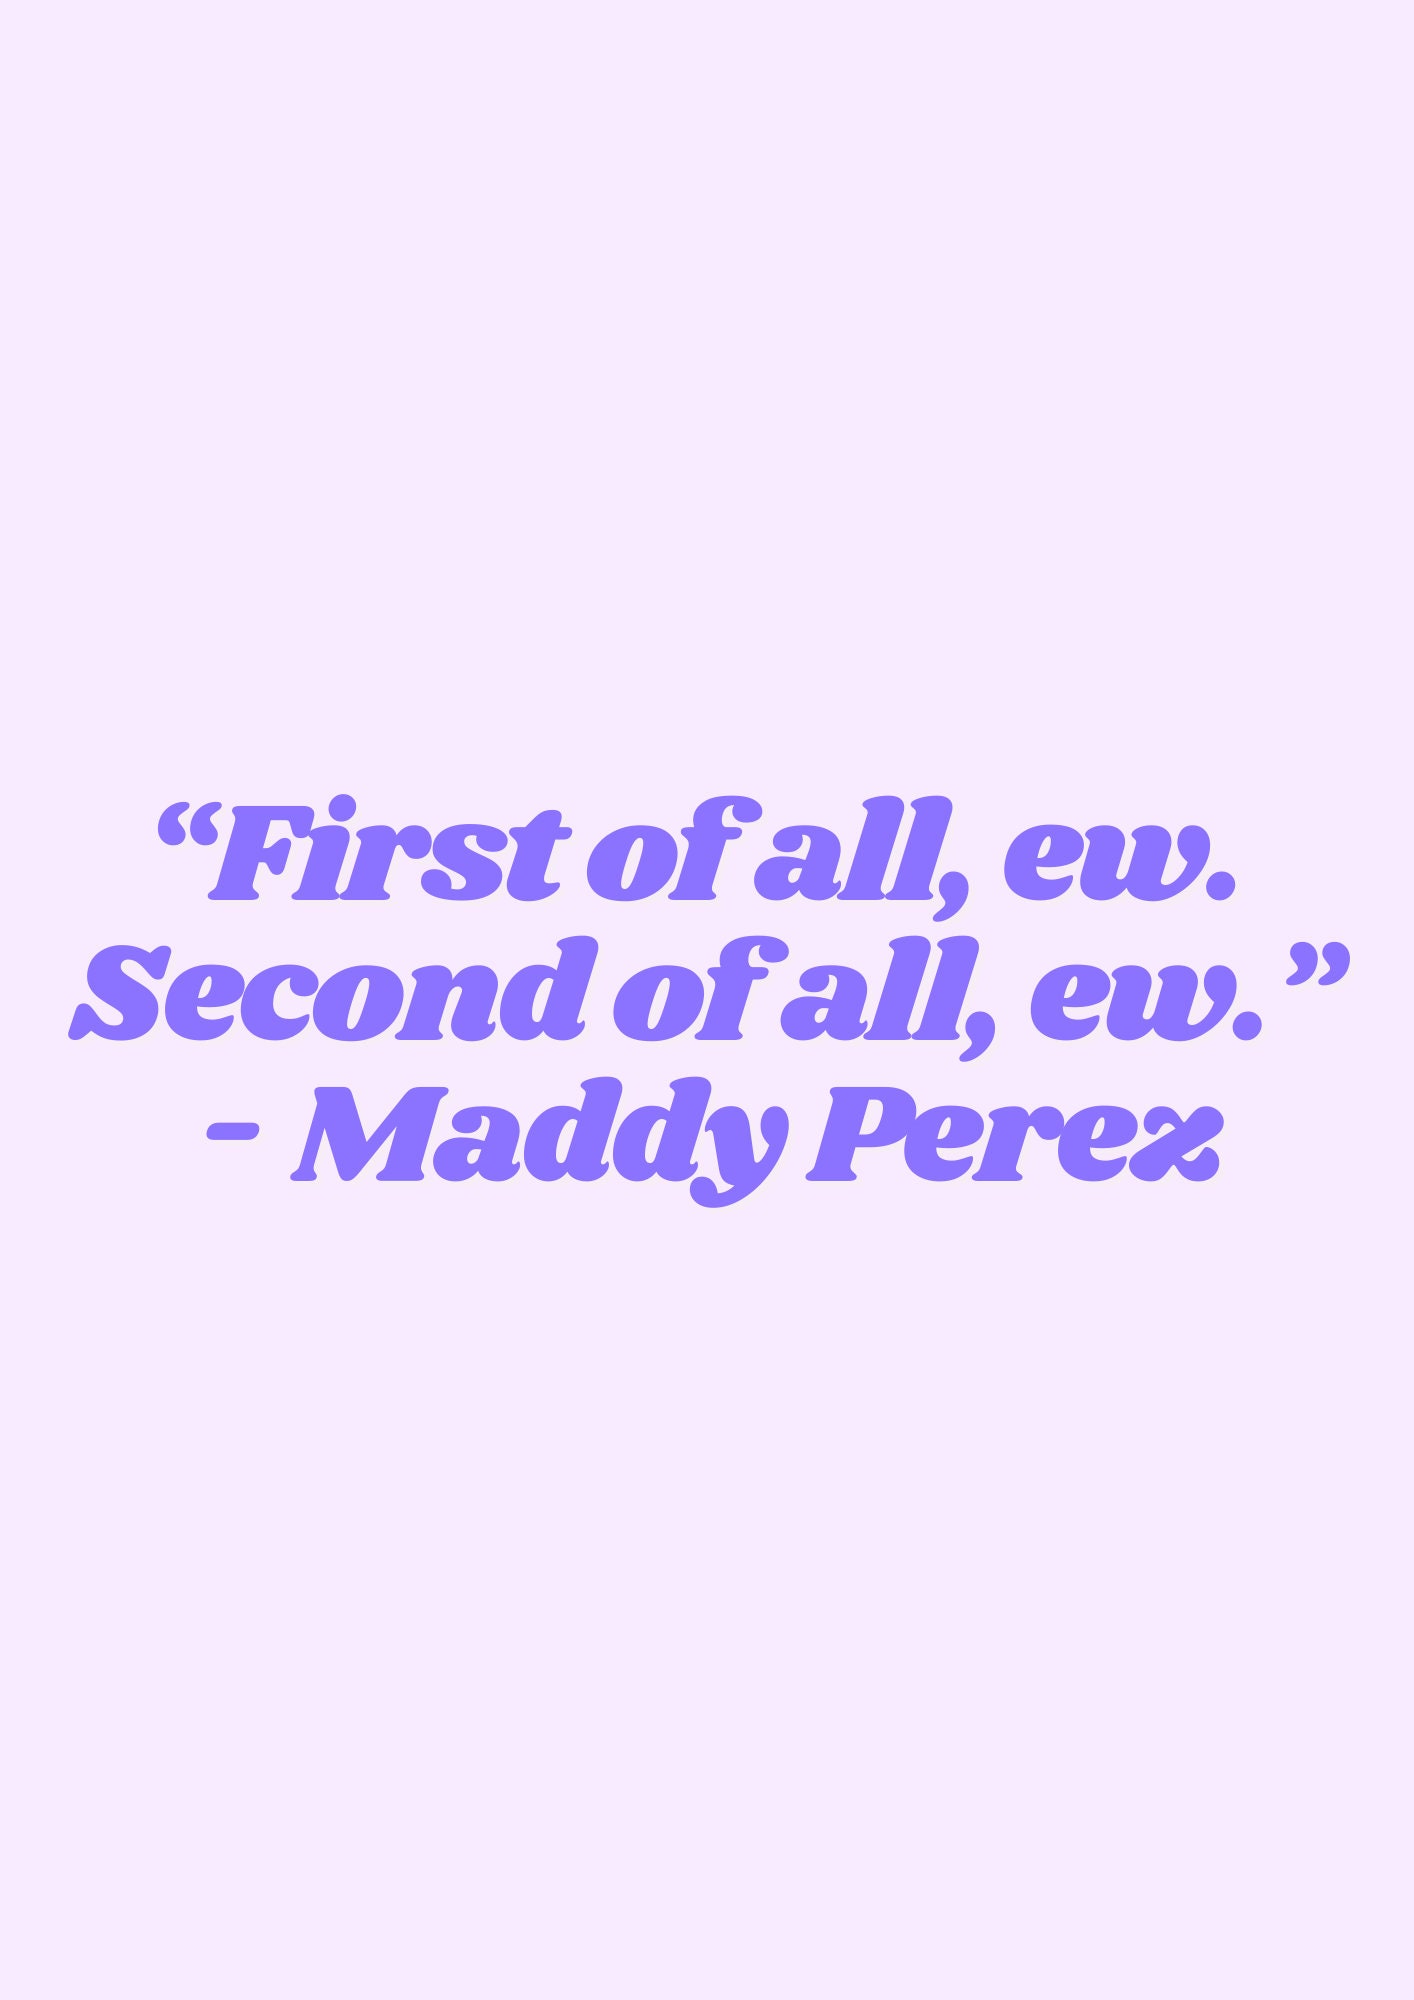 Maddy Perez Quotes from the Euphoria Series